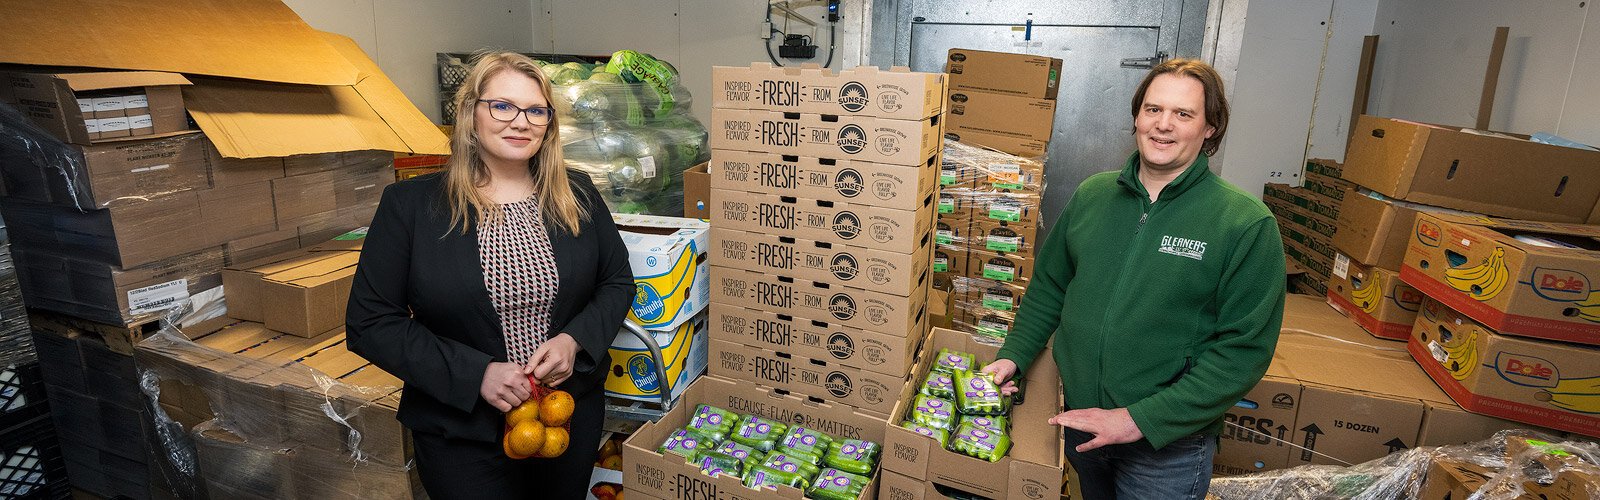 Bridget Brown, director for Gleaners Community Food Bank's Food Secure Livingston program, and Jake Williams, Gleaners' nutrition education manager, at Shared Harvest Pantry in Howell.